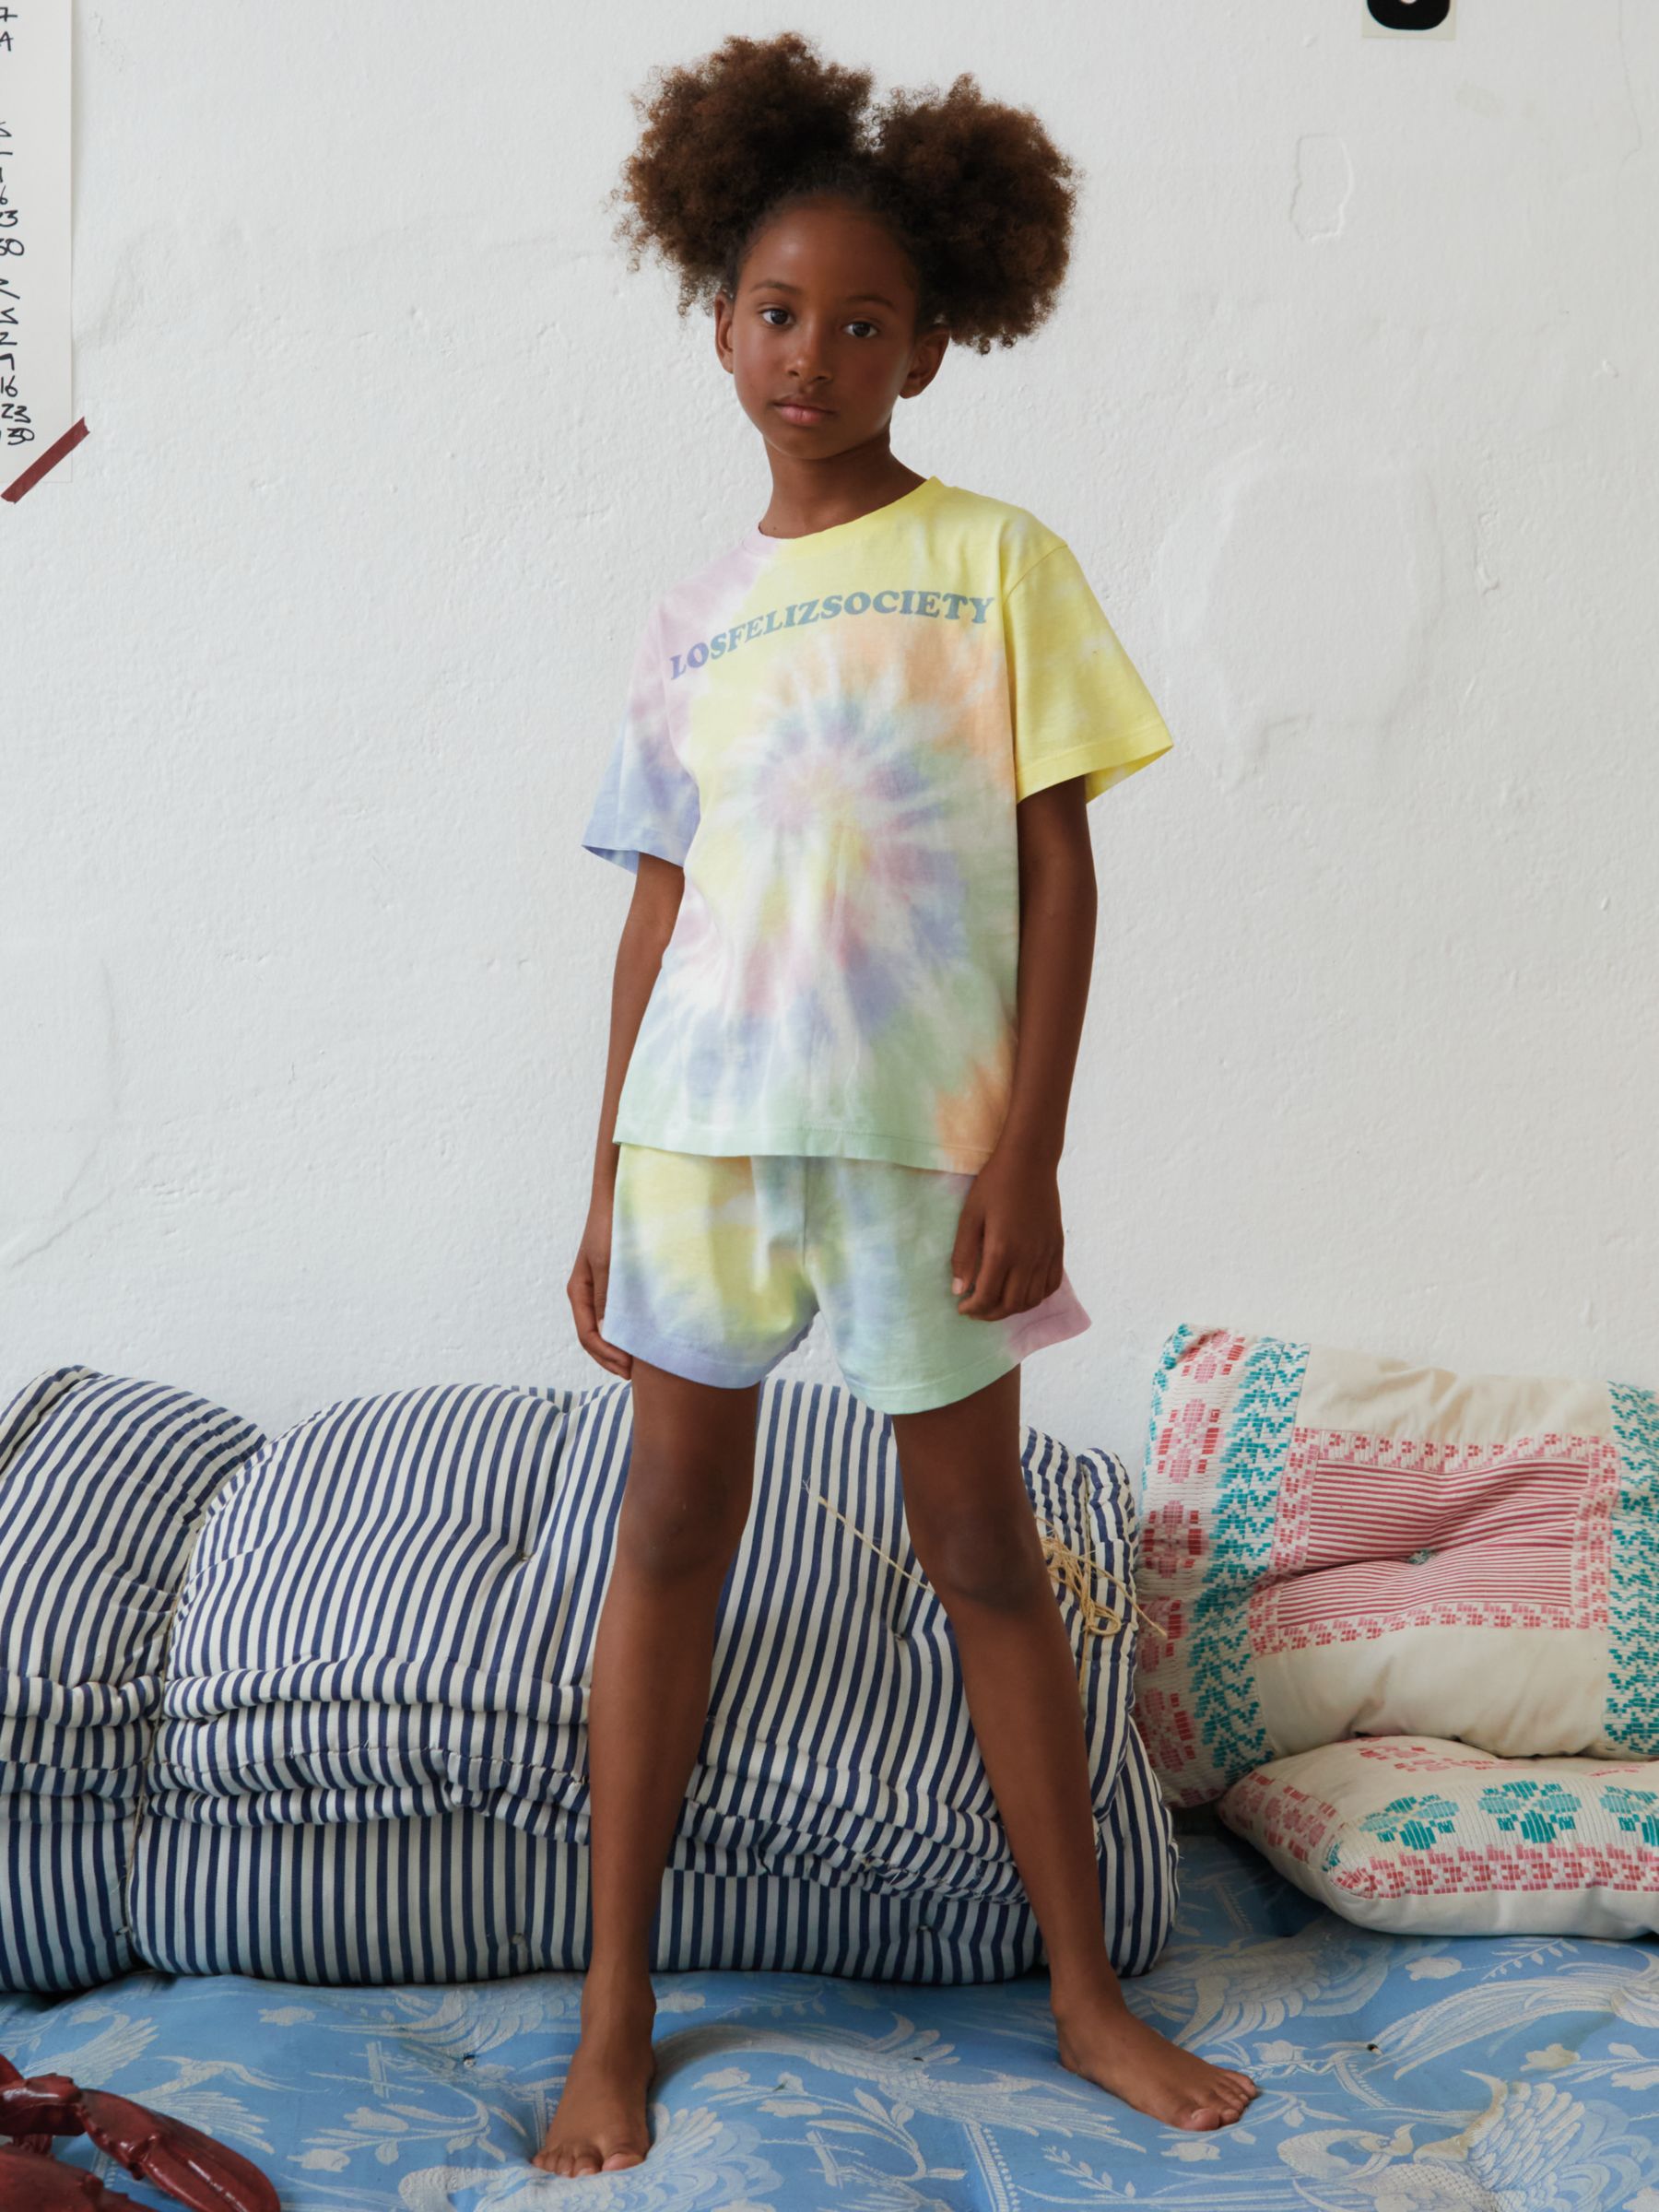 Buy The New Society Kids' Wildshire Tie Dye T-Shirt, Multi Online at johnlewis.com